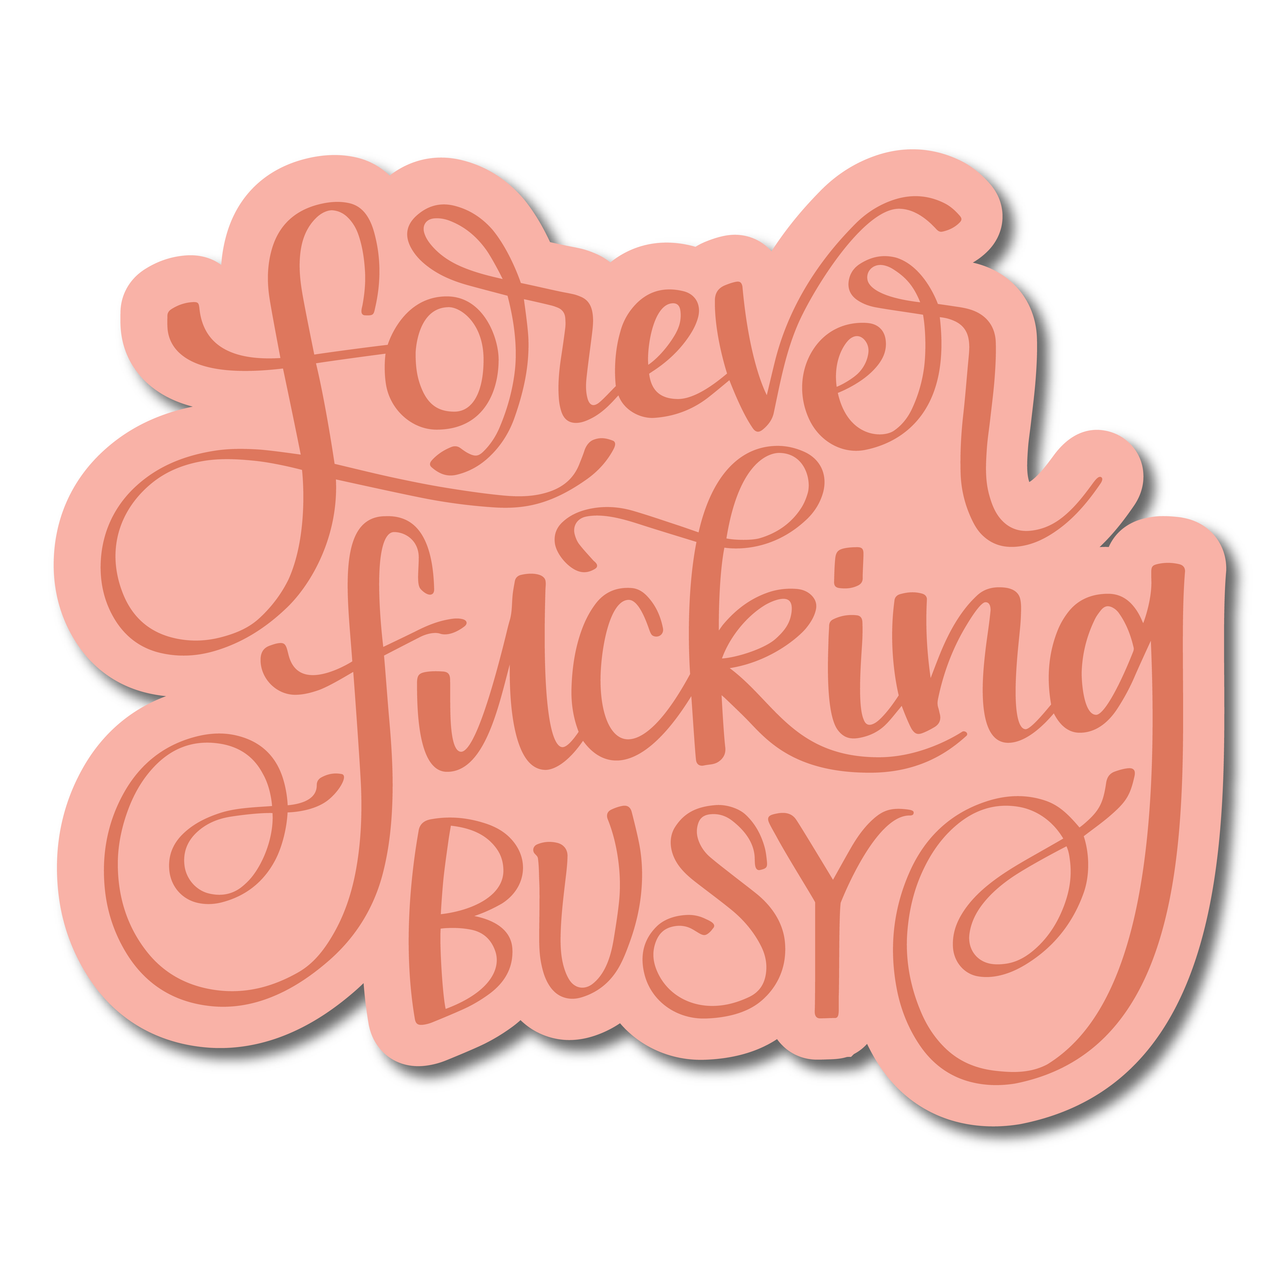 Forever Fucking Busy